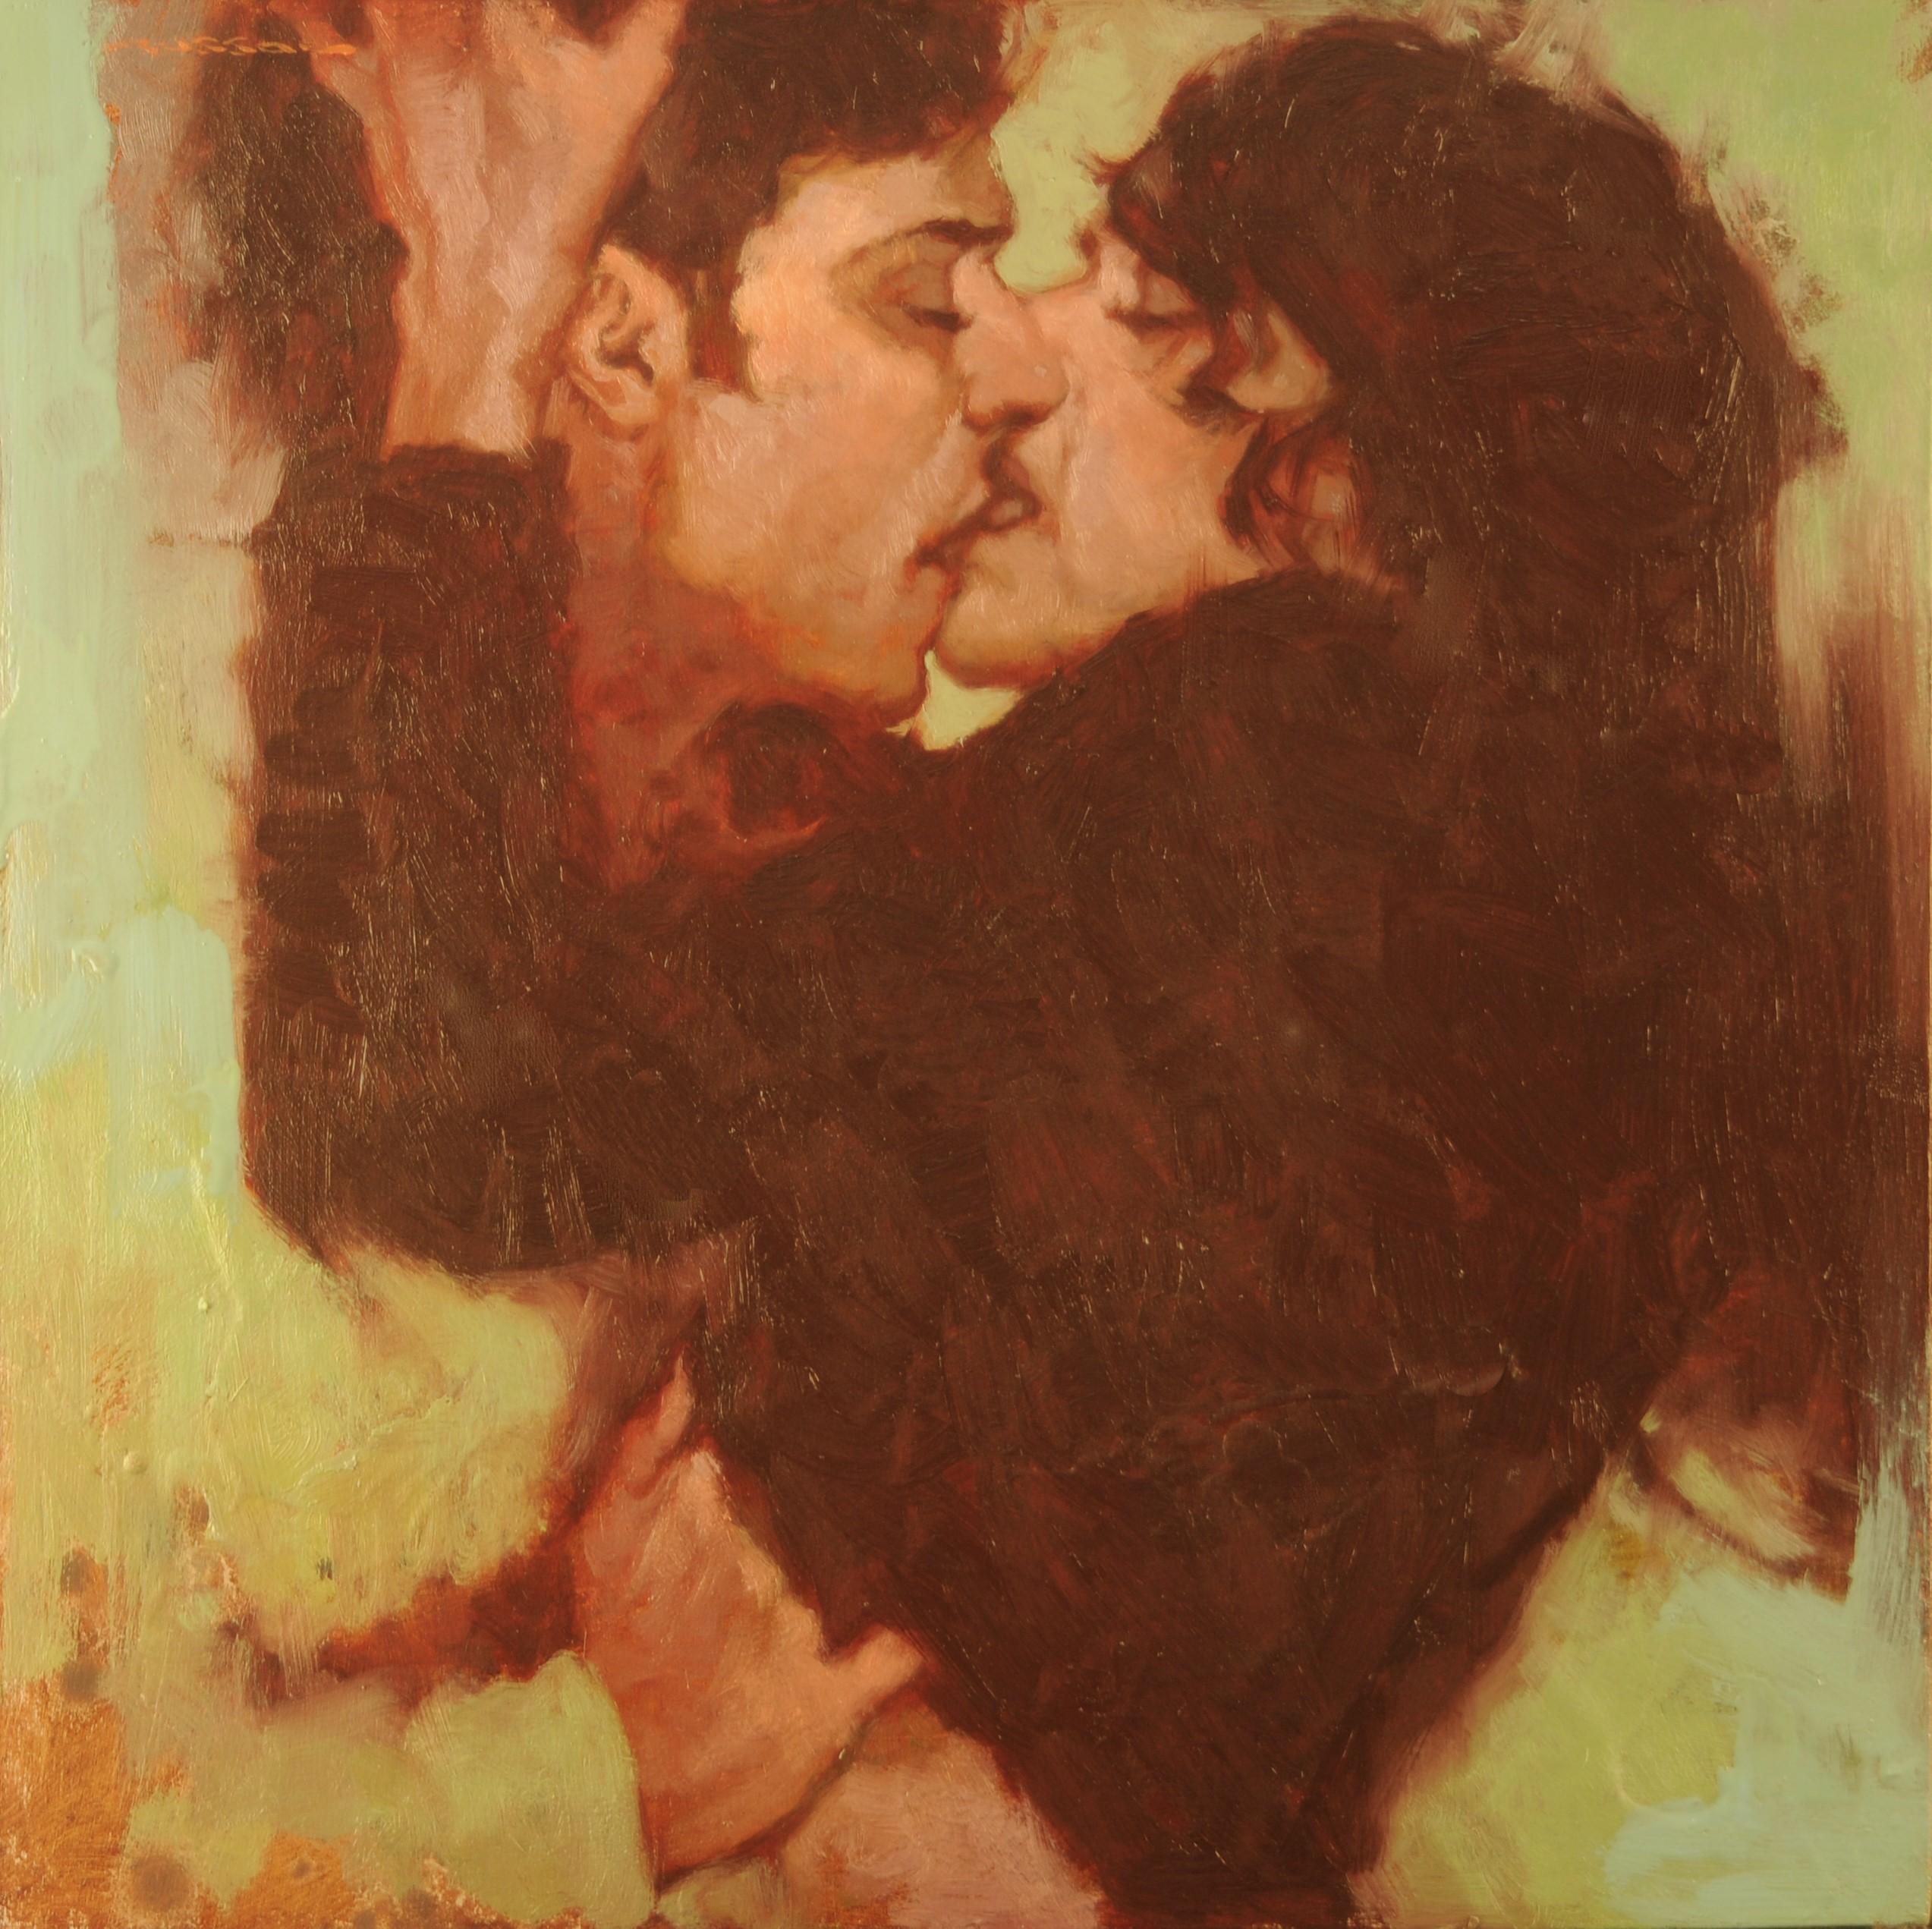 Joseph Lorusso Figurative Painting - "When I'm With You"